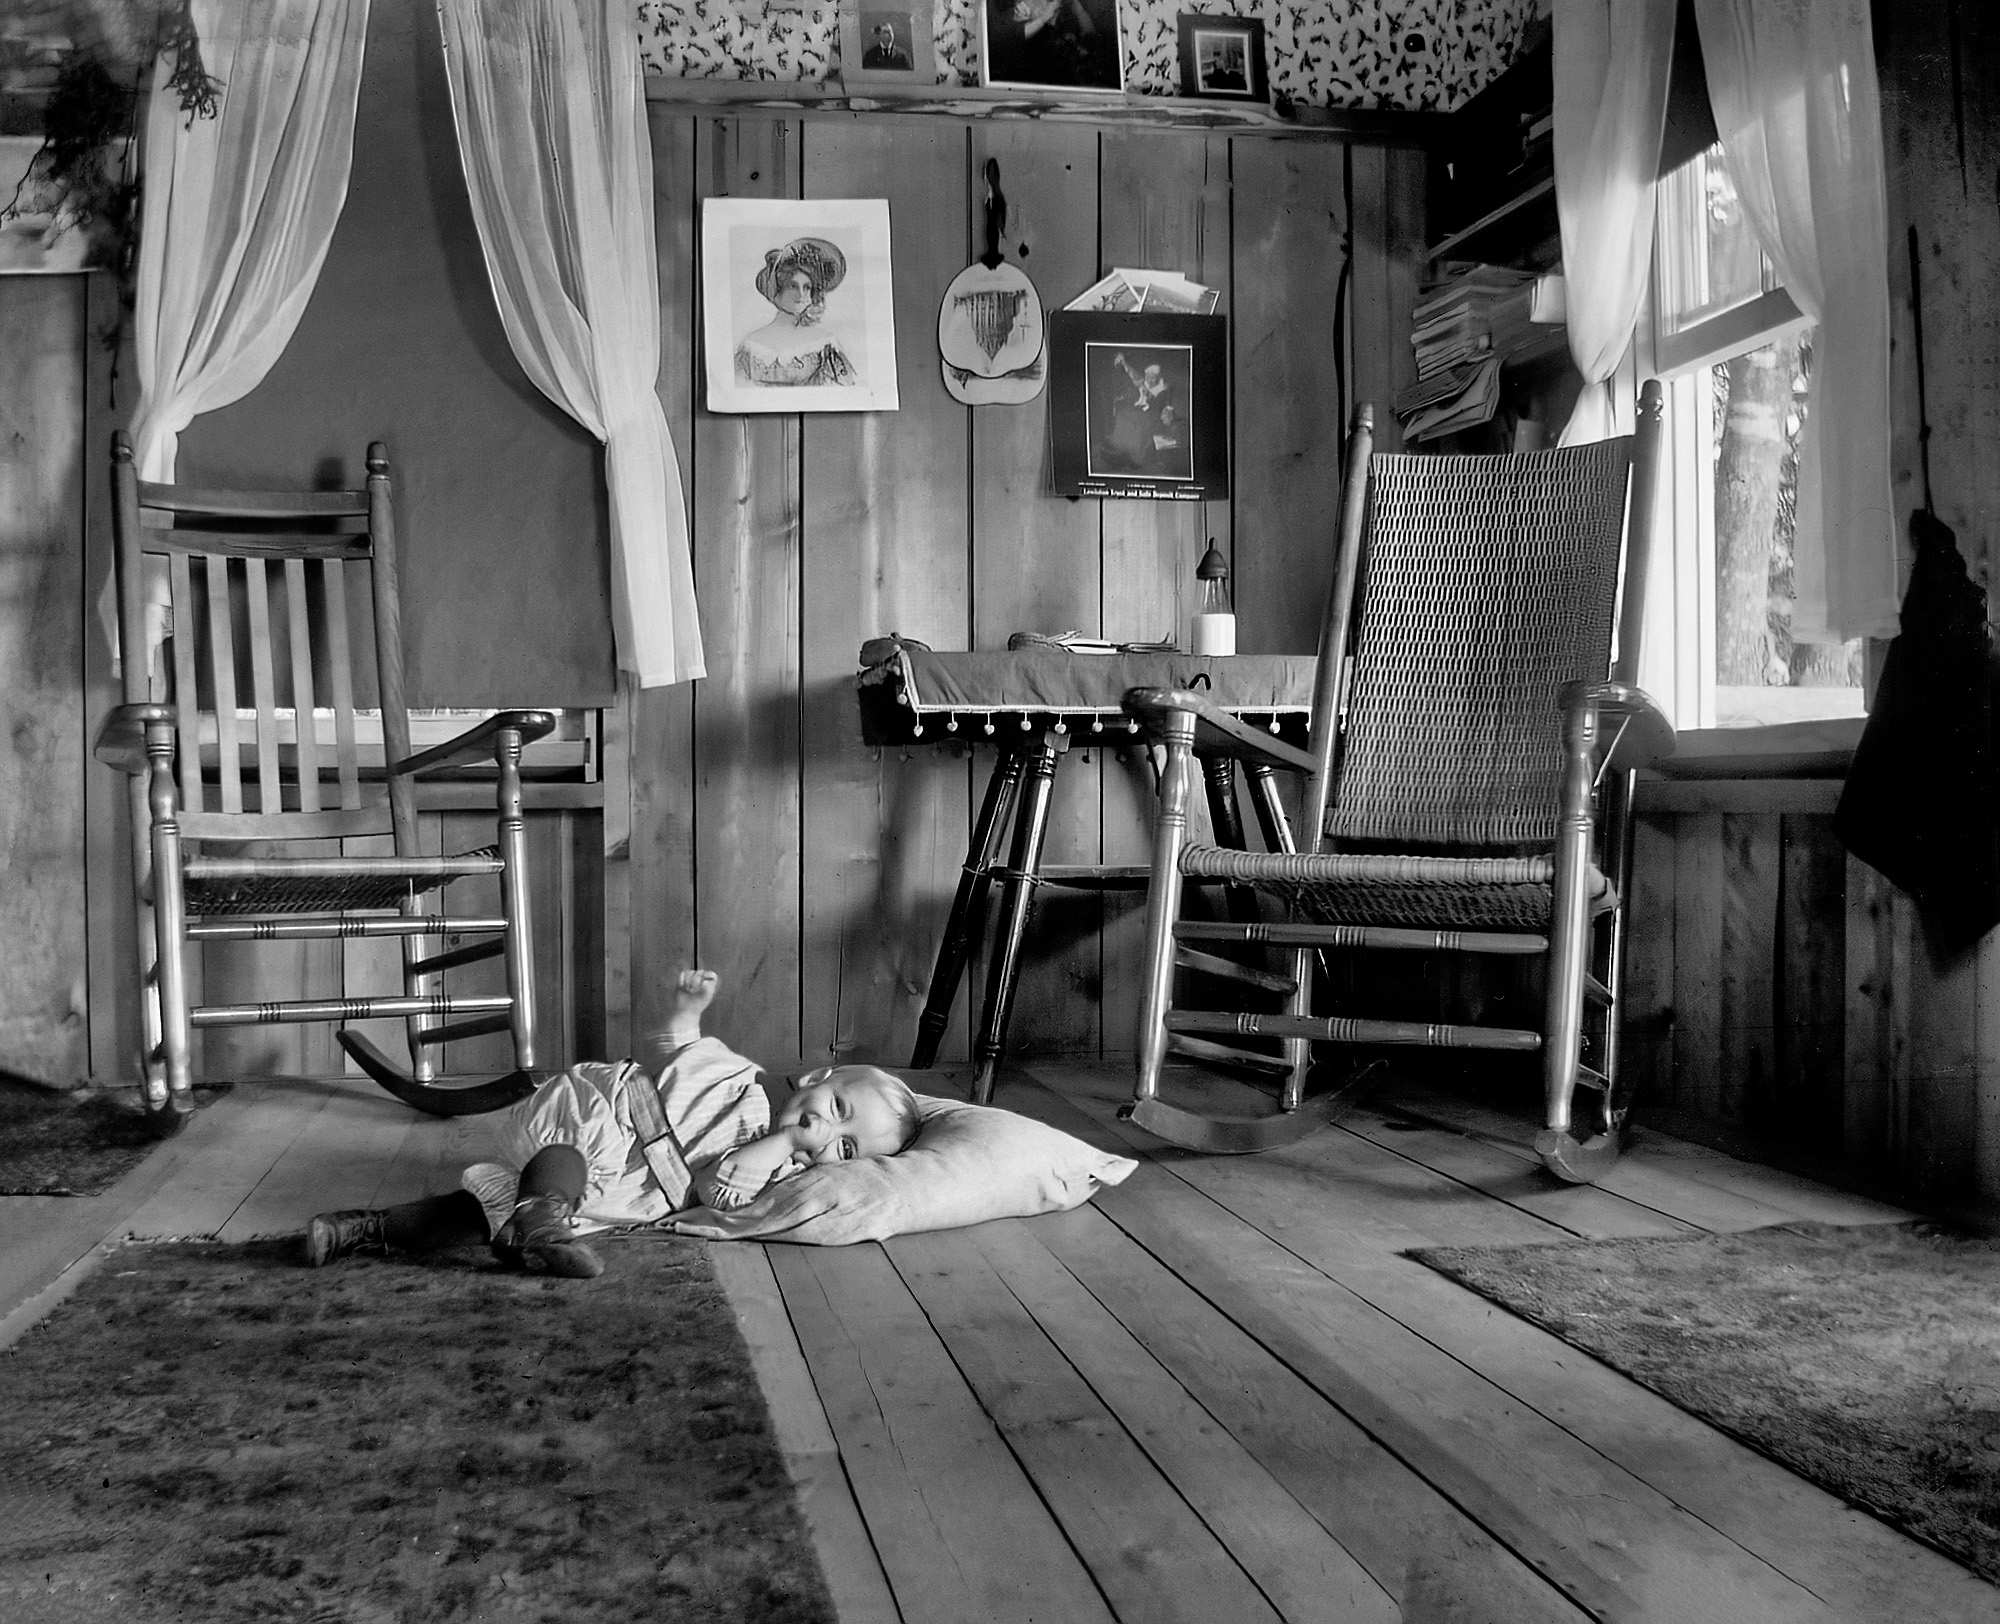 This image of a baby relaxing on the floor comes from a set of glass negatives taken in Pawnee City, Nebraska, around 1910 or earlier. View full size.